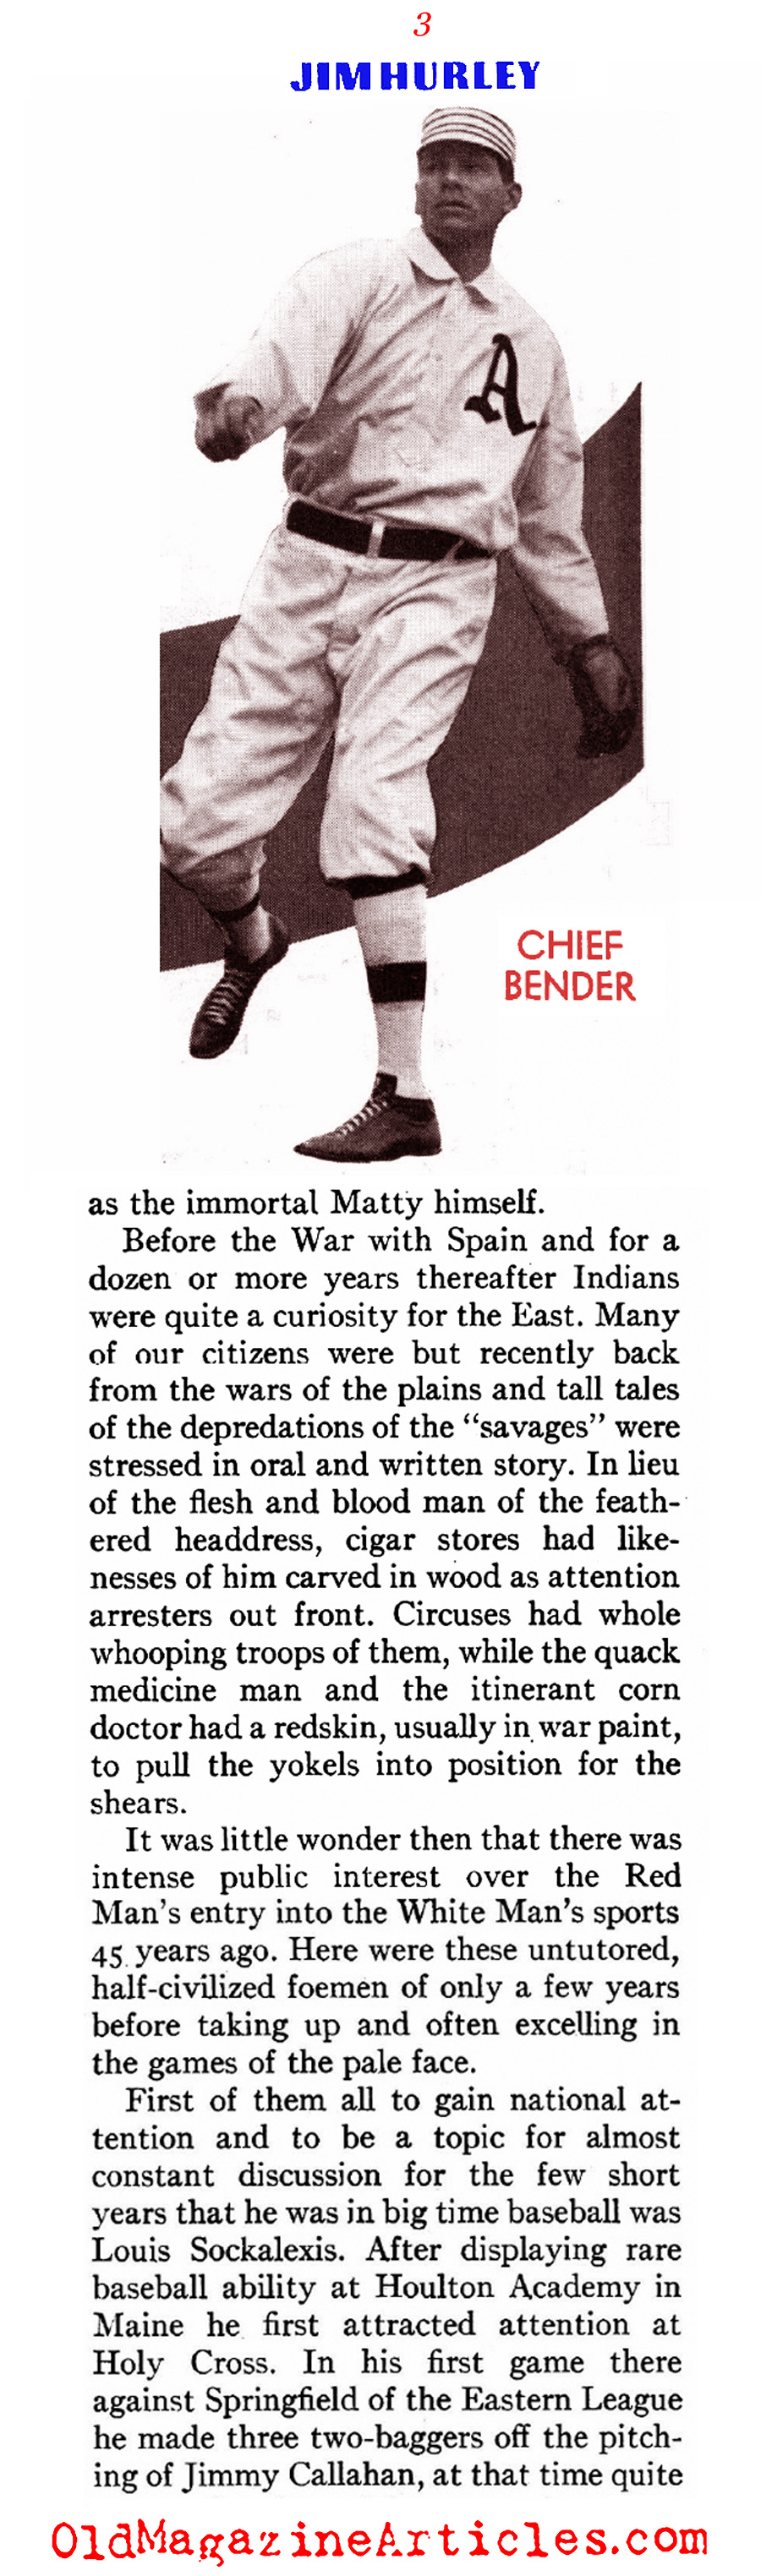 The Great Native-American Athletes of the Early 20th Century (American Legion Magazine, 1940)